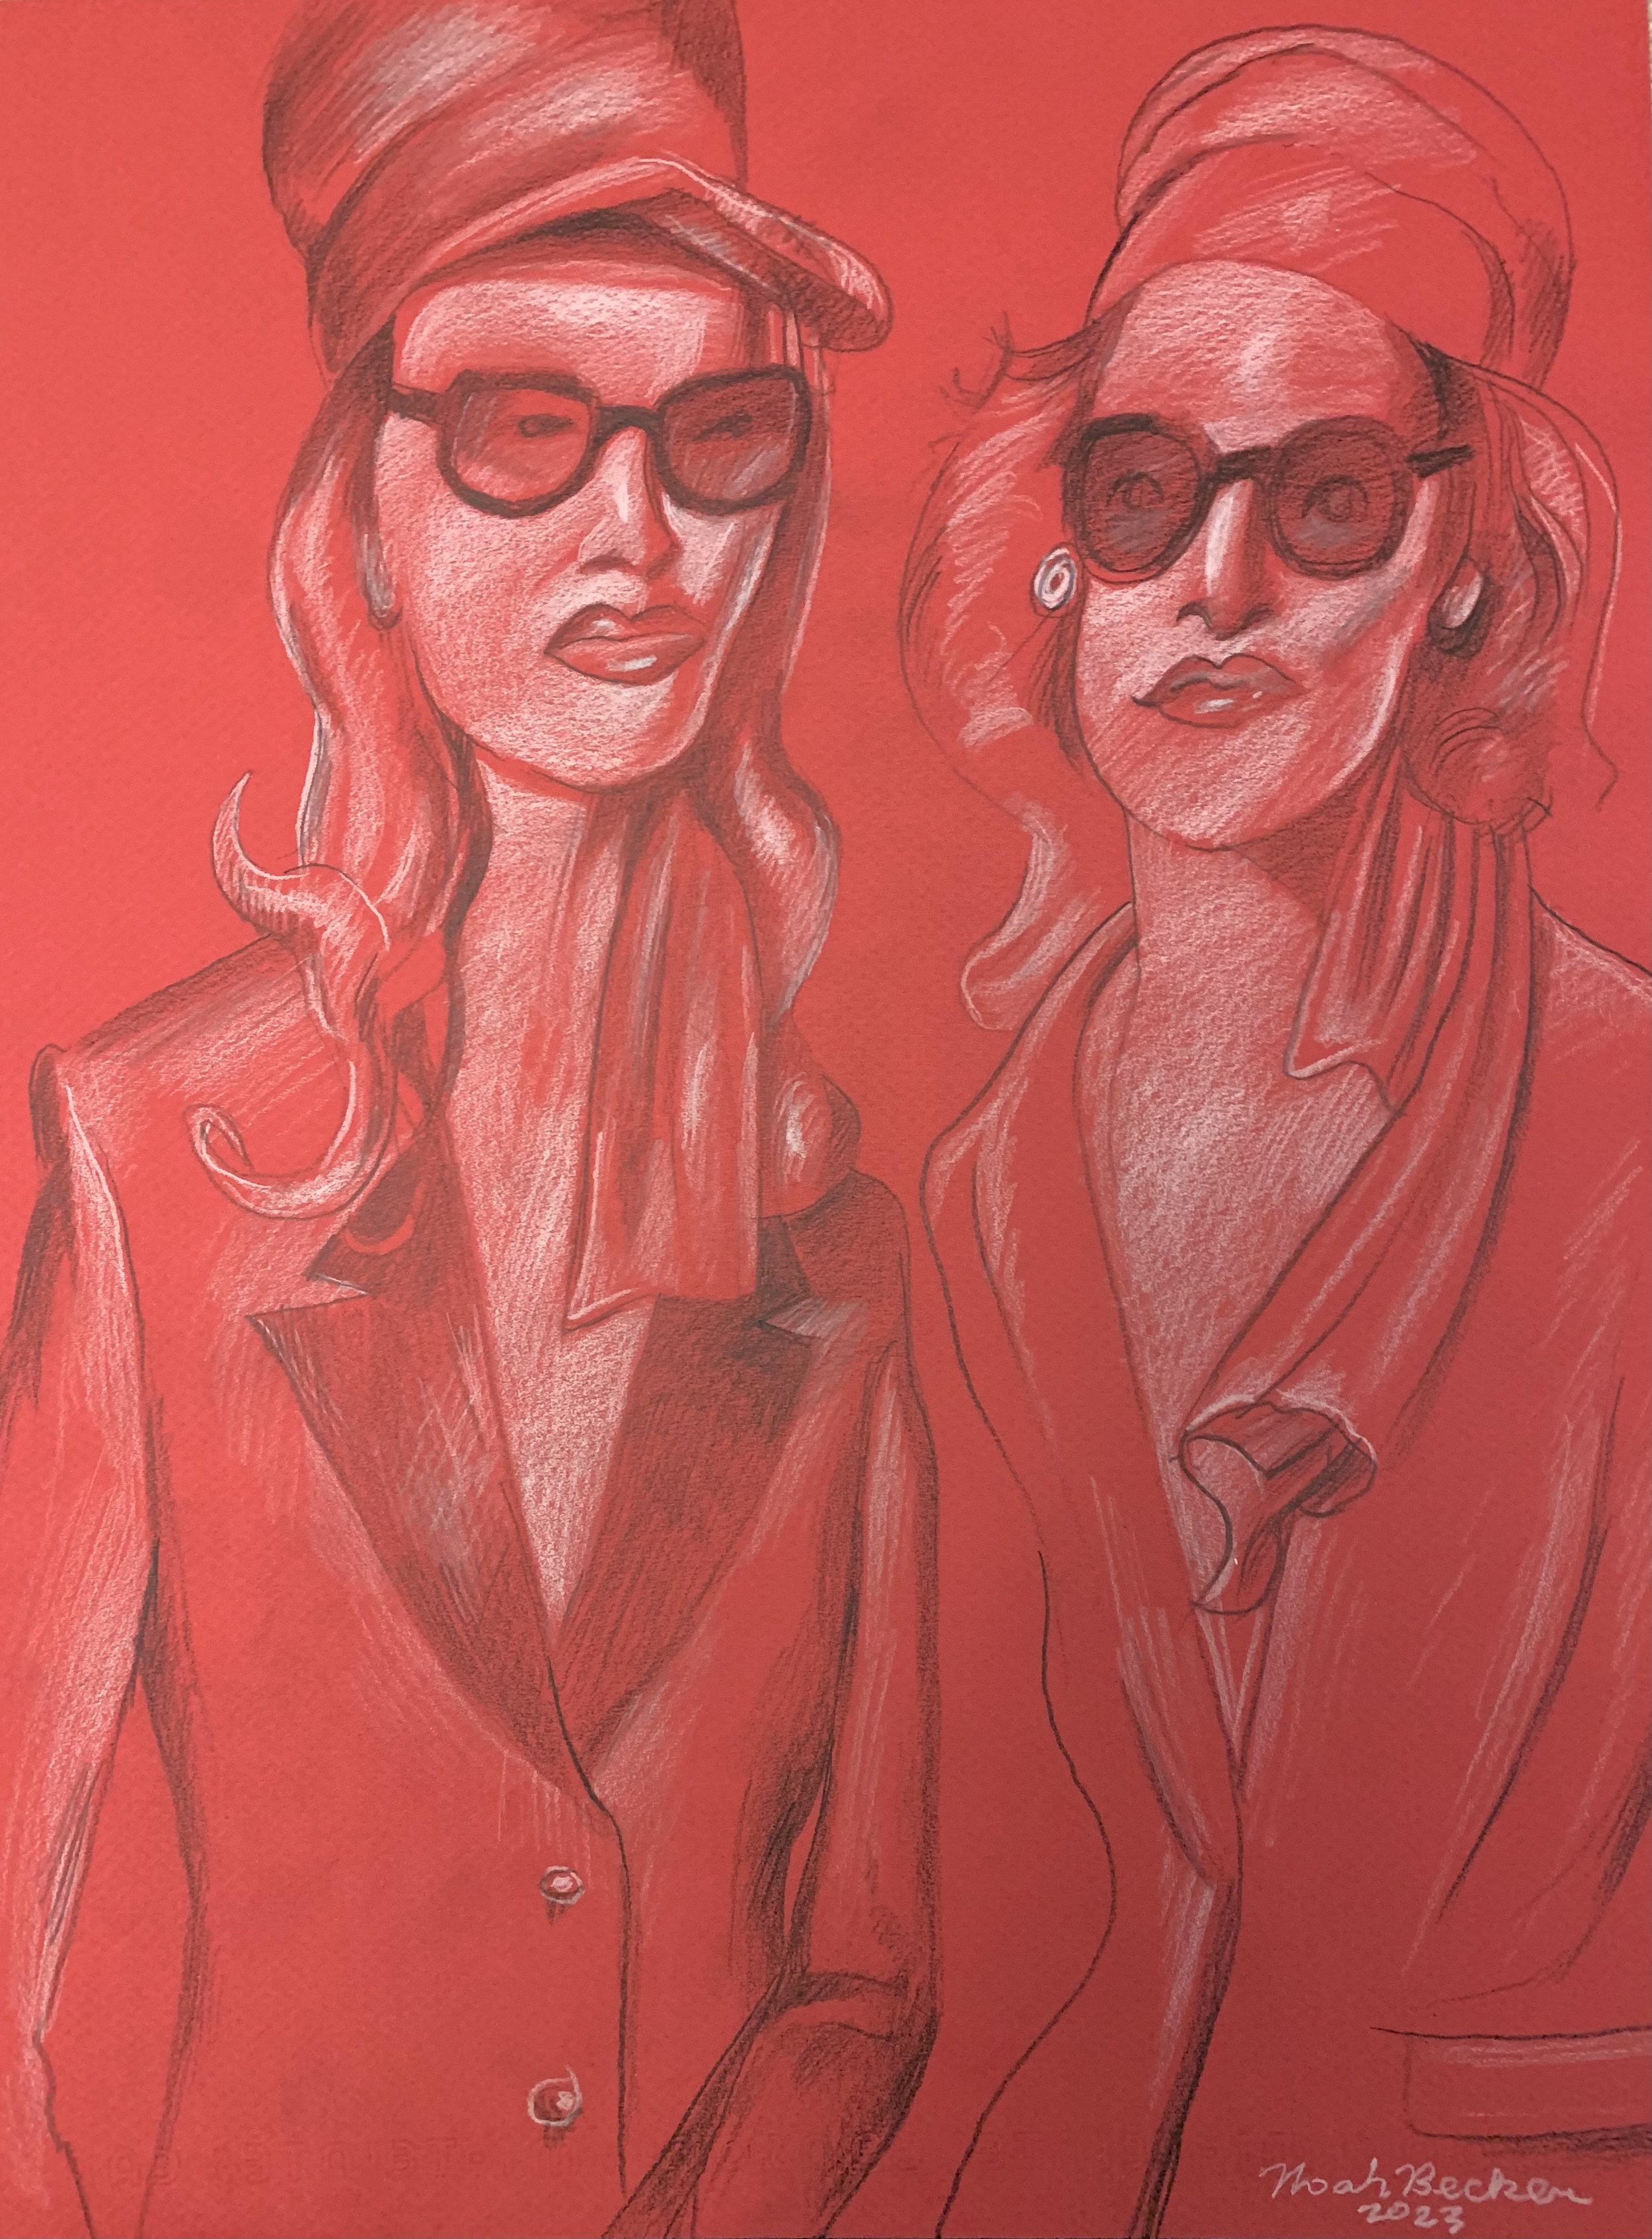 Noah Becker Study for Two Women on Red Paper 2023.jpeg